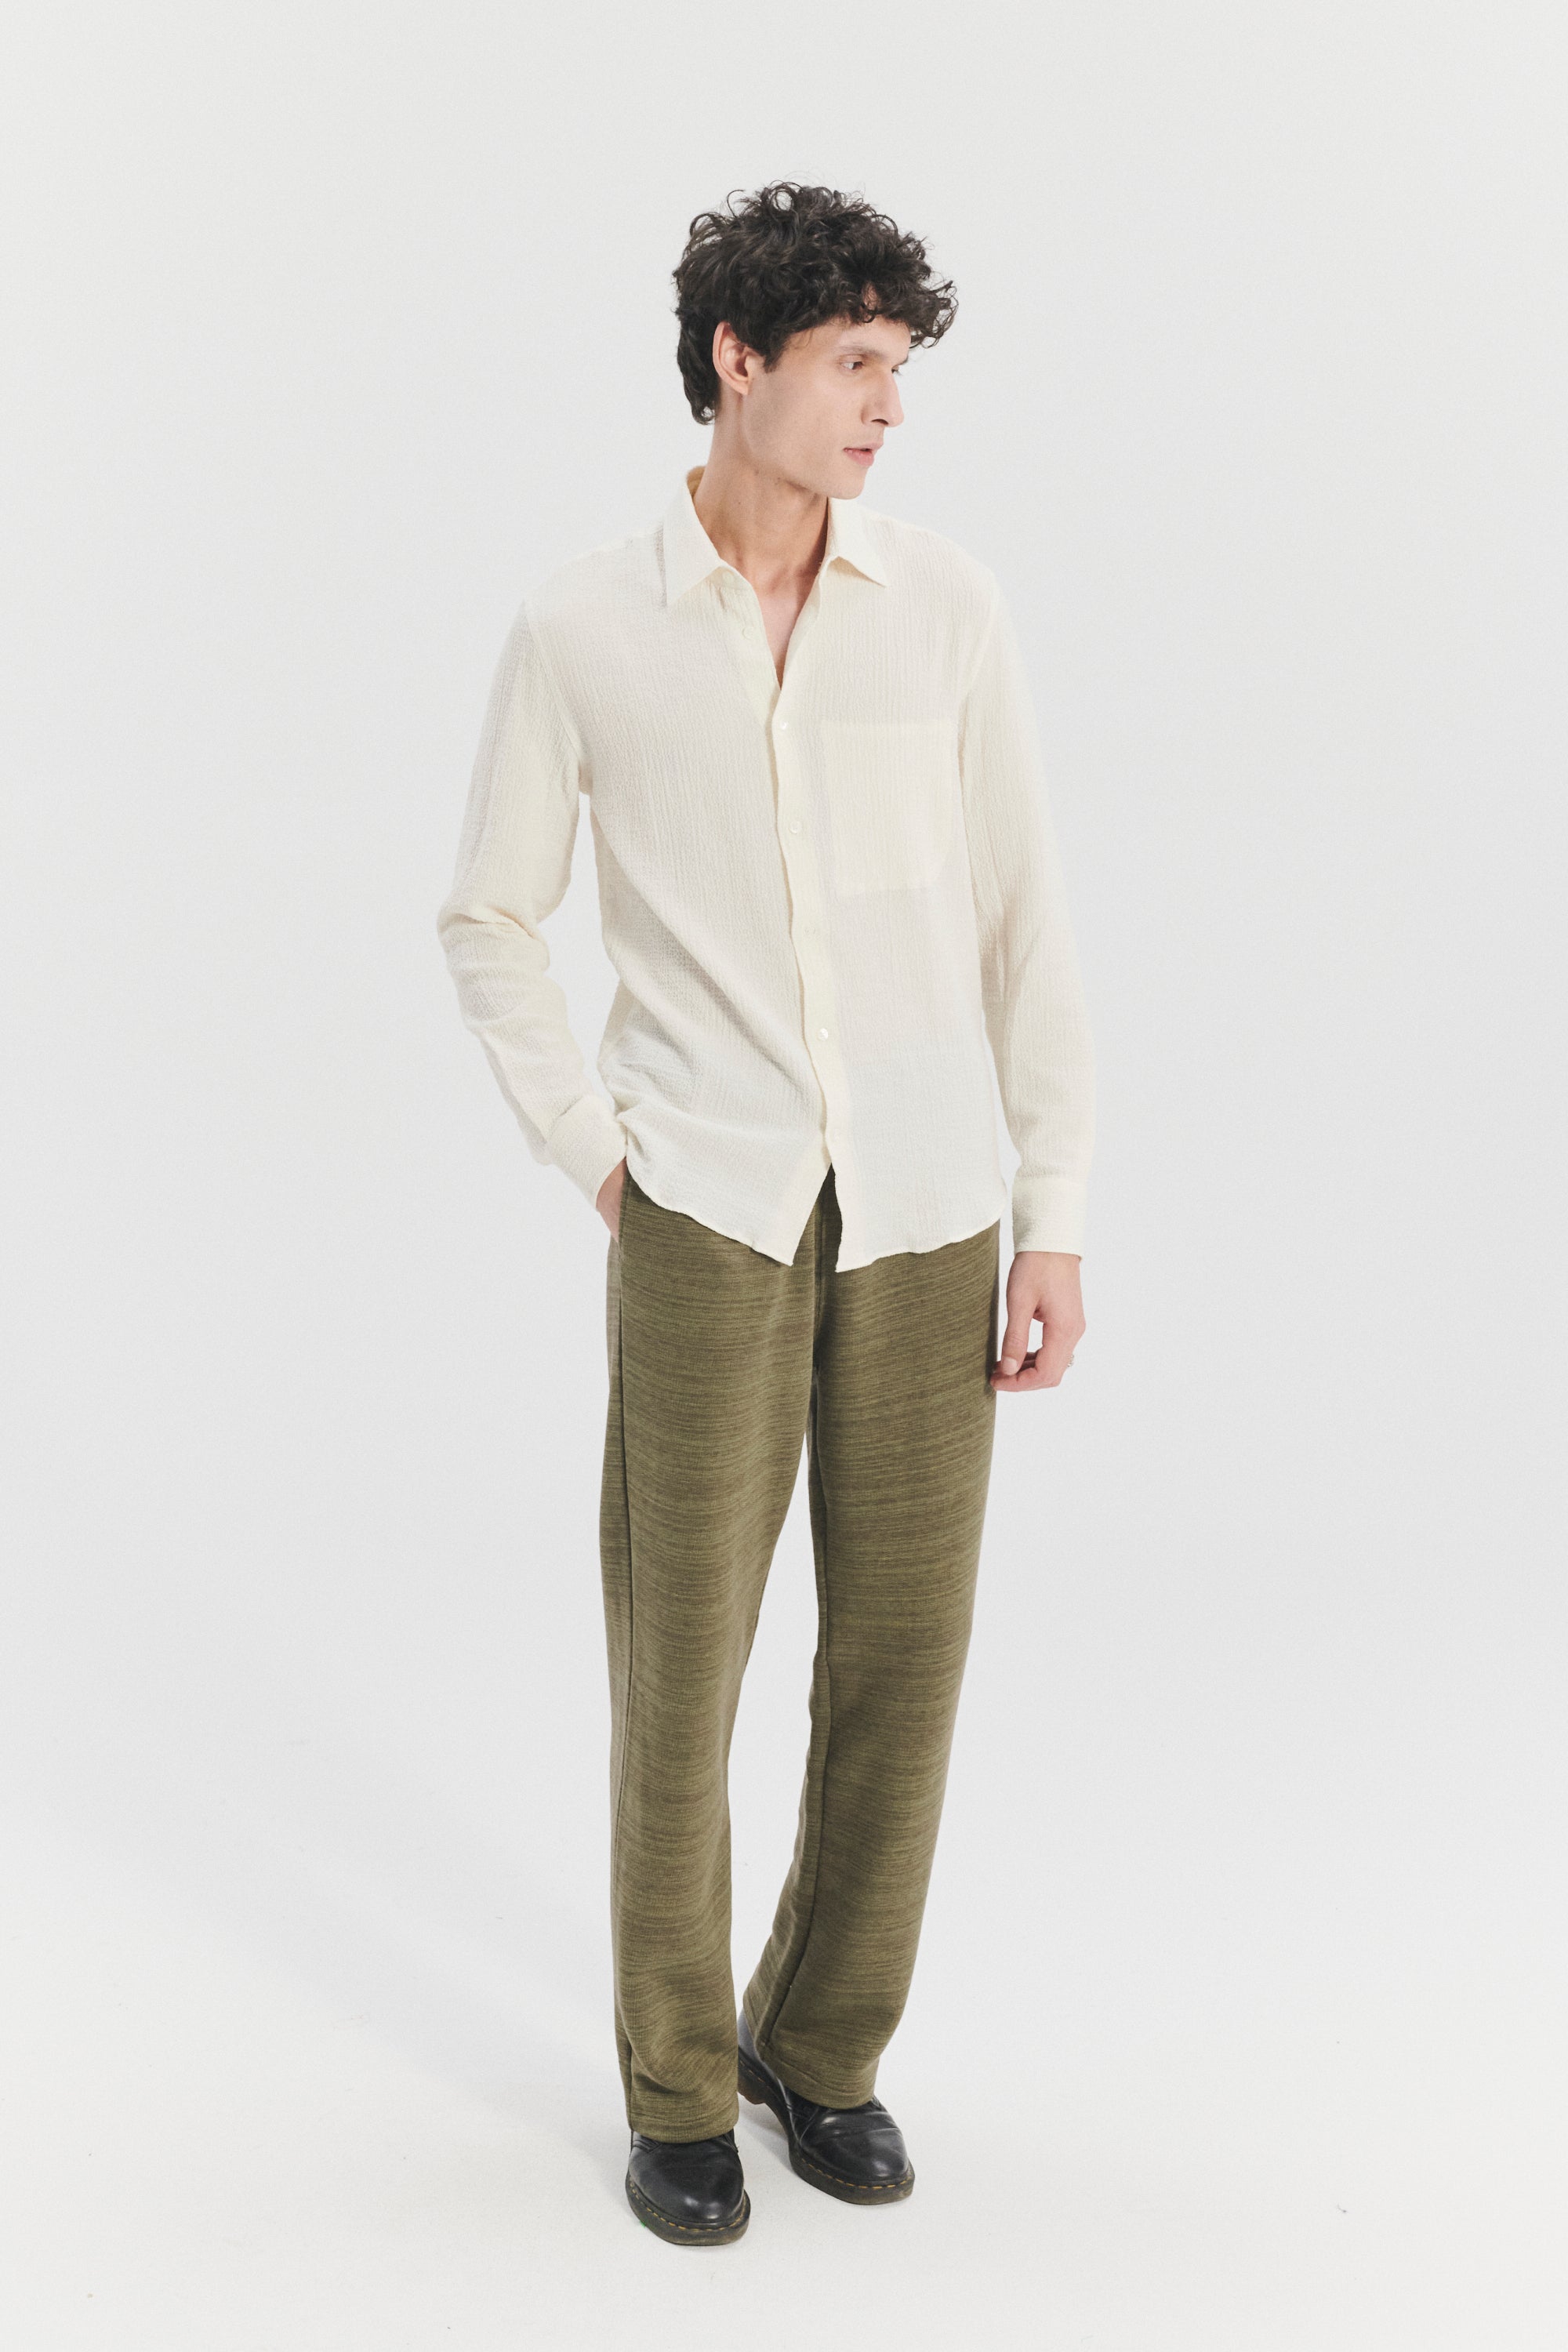 feel-good-shirt-in-the-finest-creamy-white-portuguese-cashmere-and-cotton-seersucker